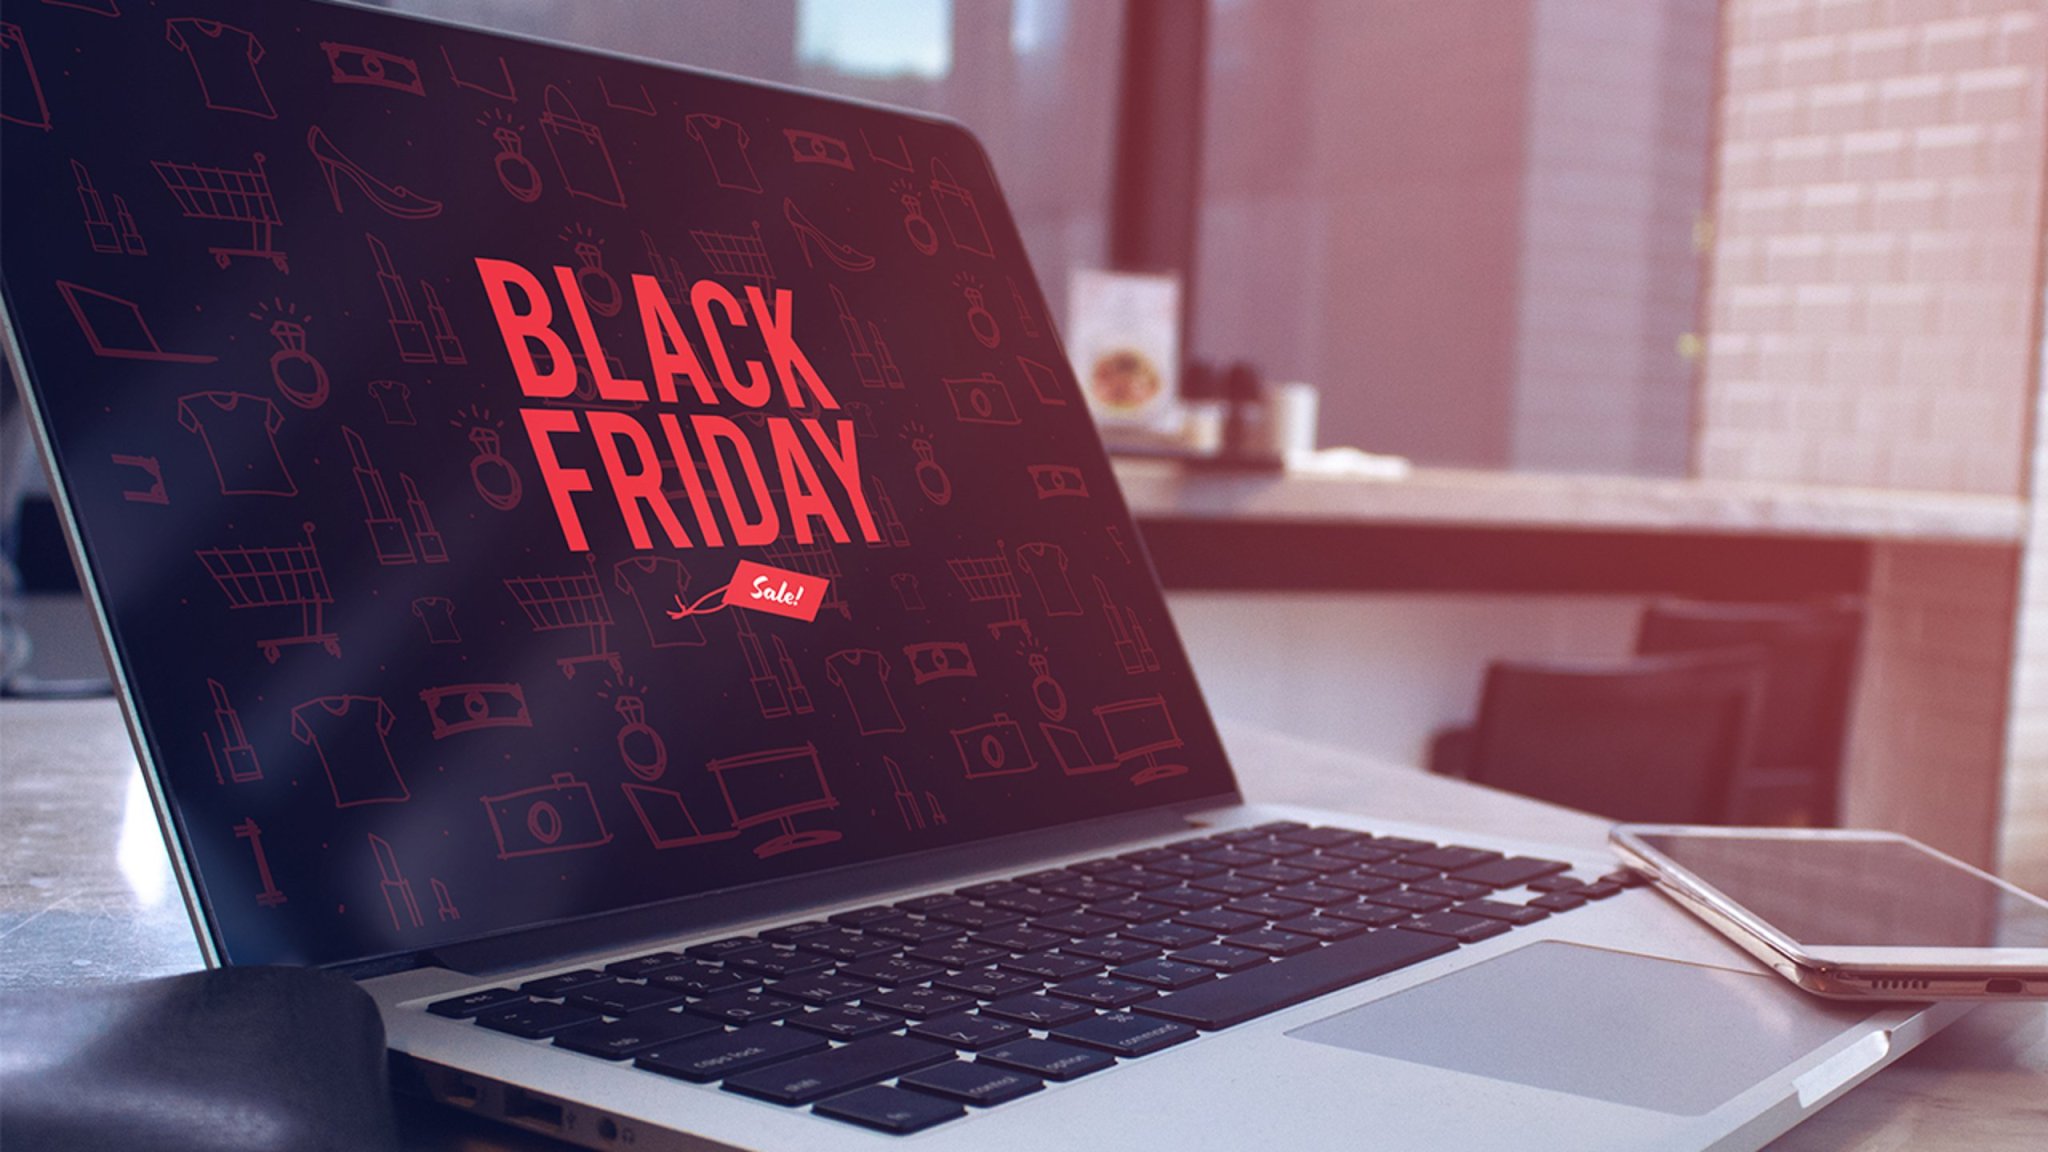 Black Friday Spending Decreases for the First Time